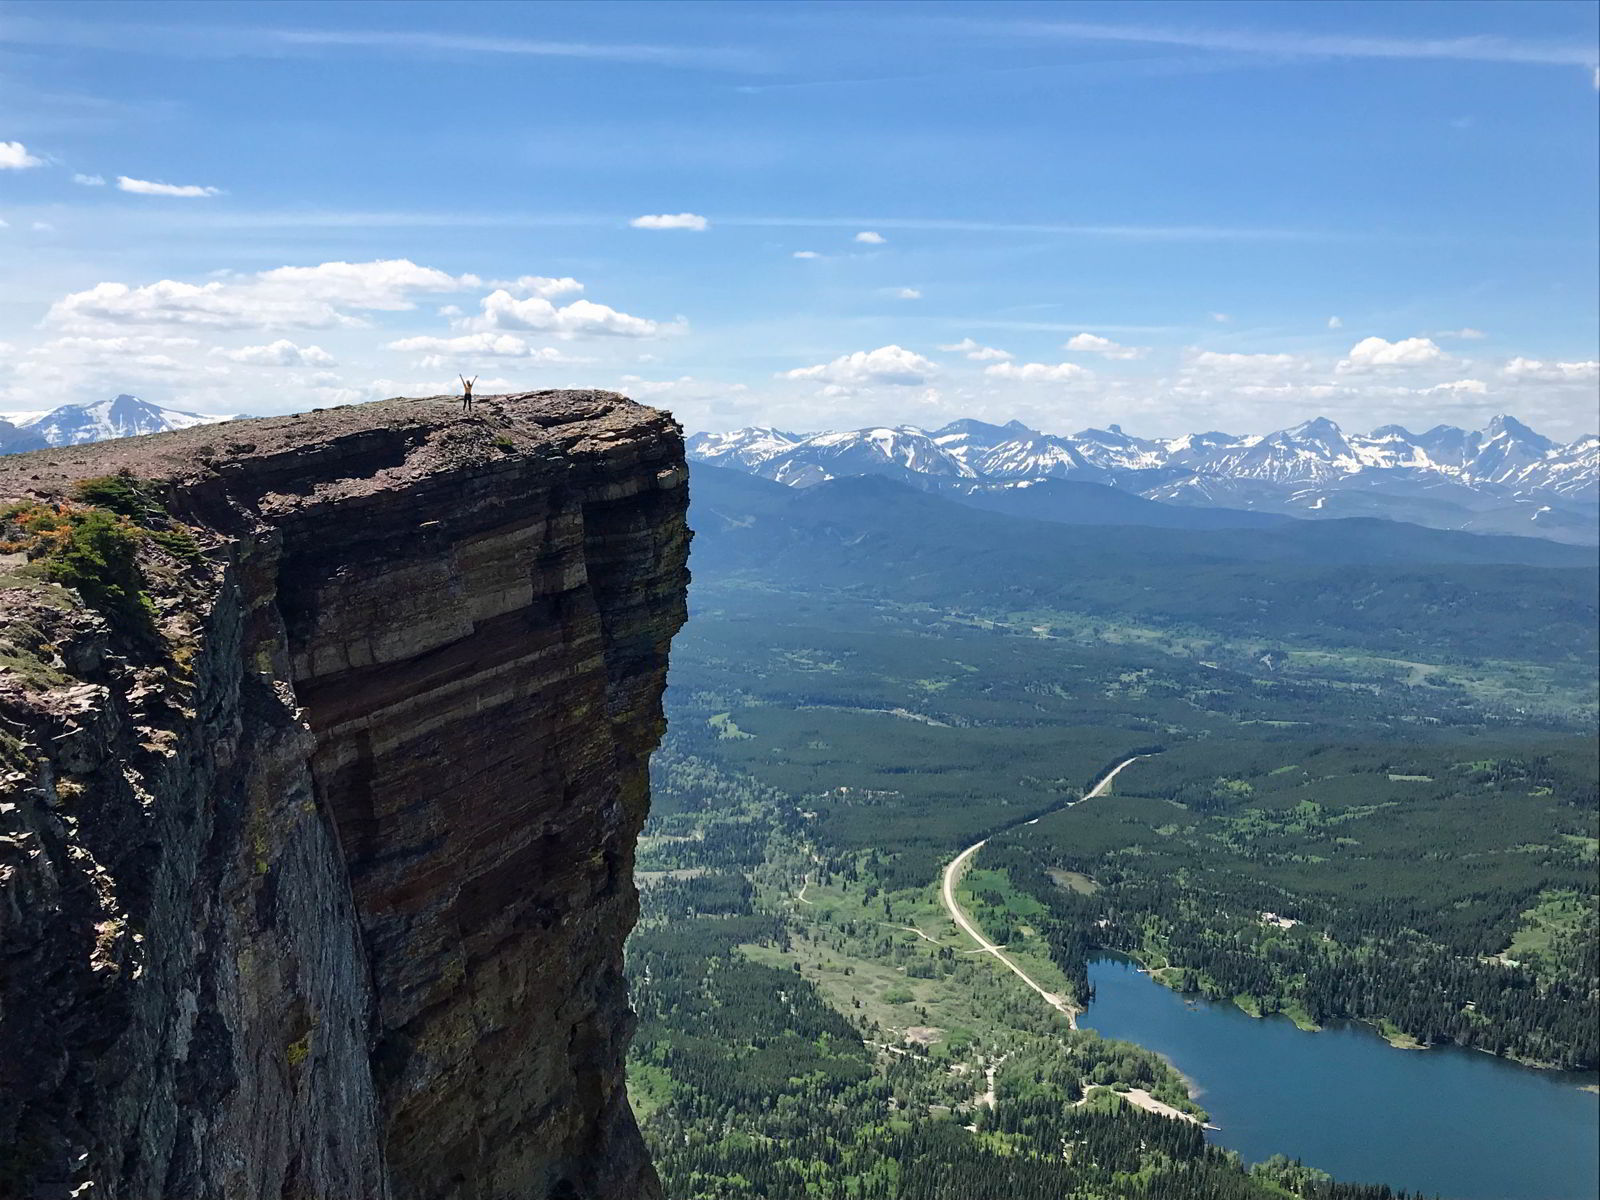 An image of the view from the top of Table Mountain in Alberta, Canada